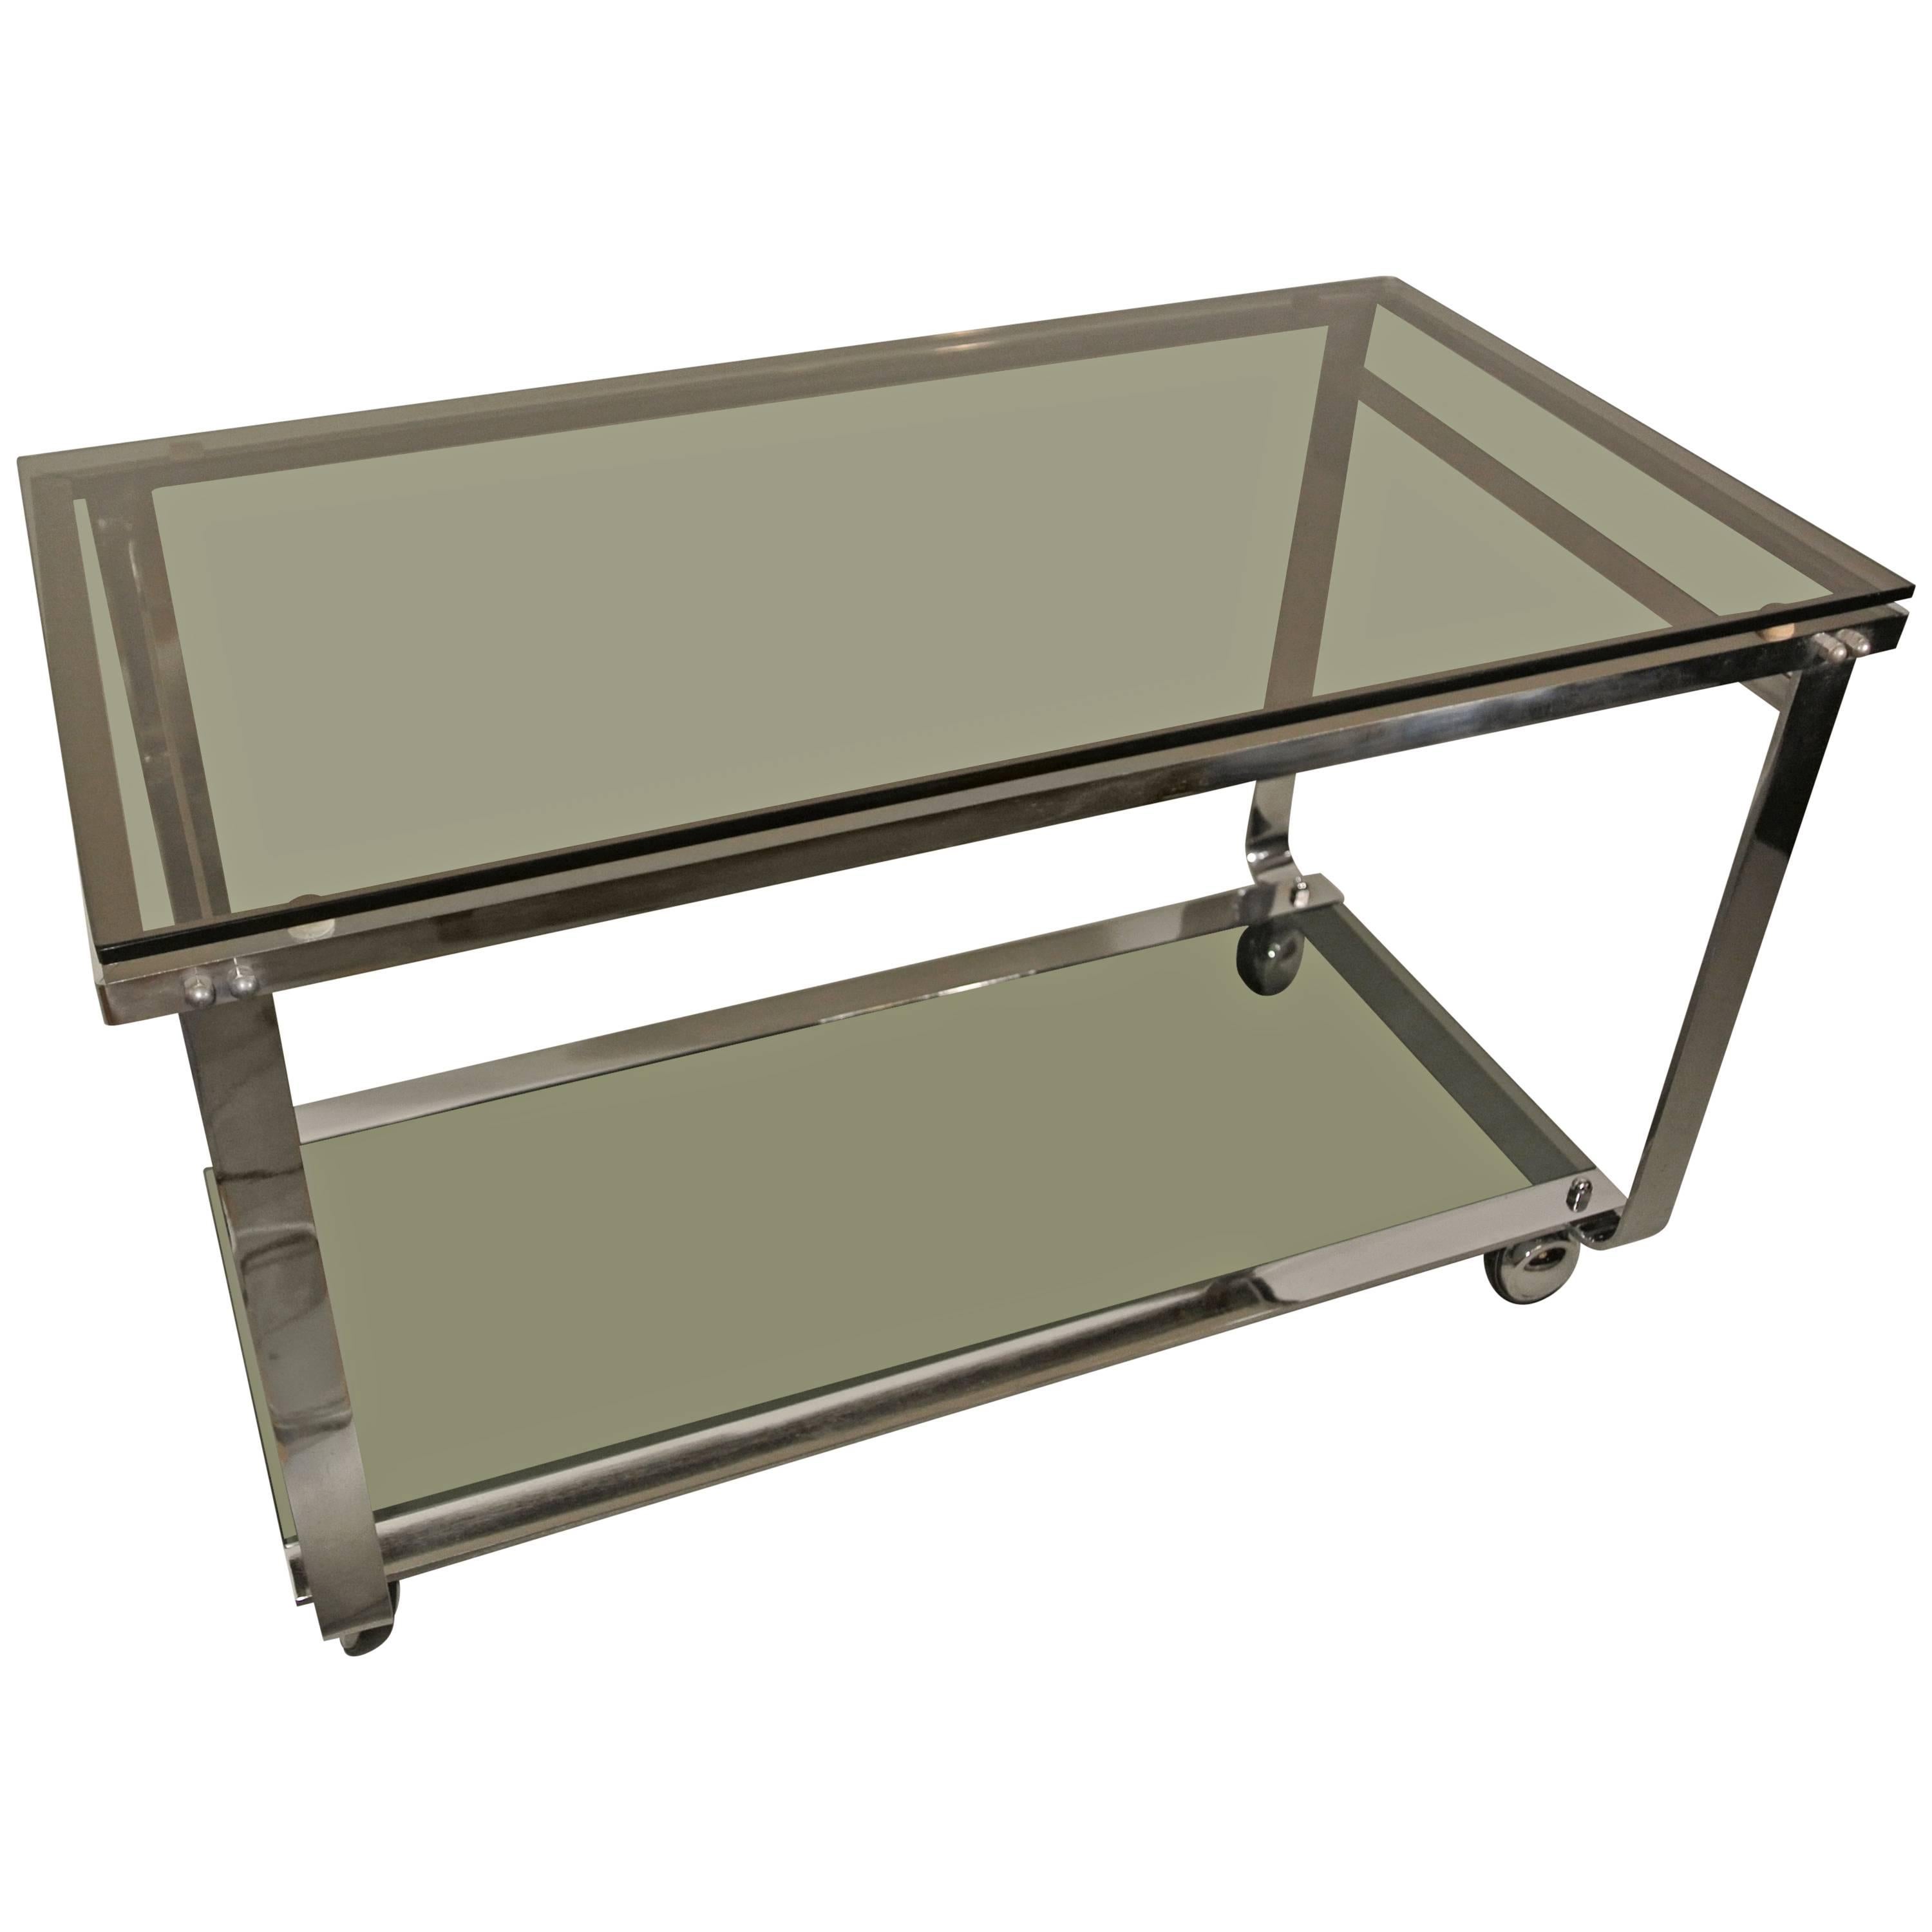 Mid-Century Chrome Dessert or Bar Cart on Wheels with Tinted Glass, circa 1970